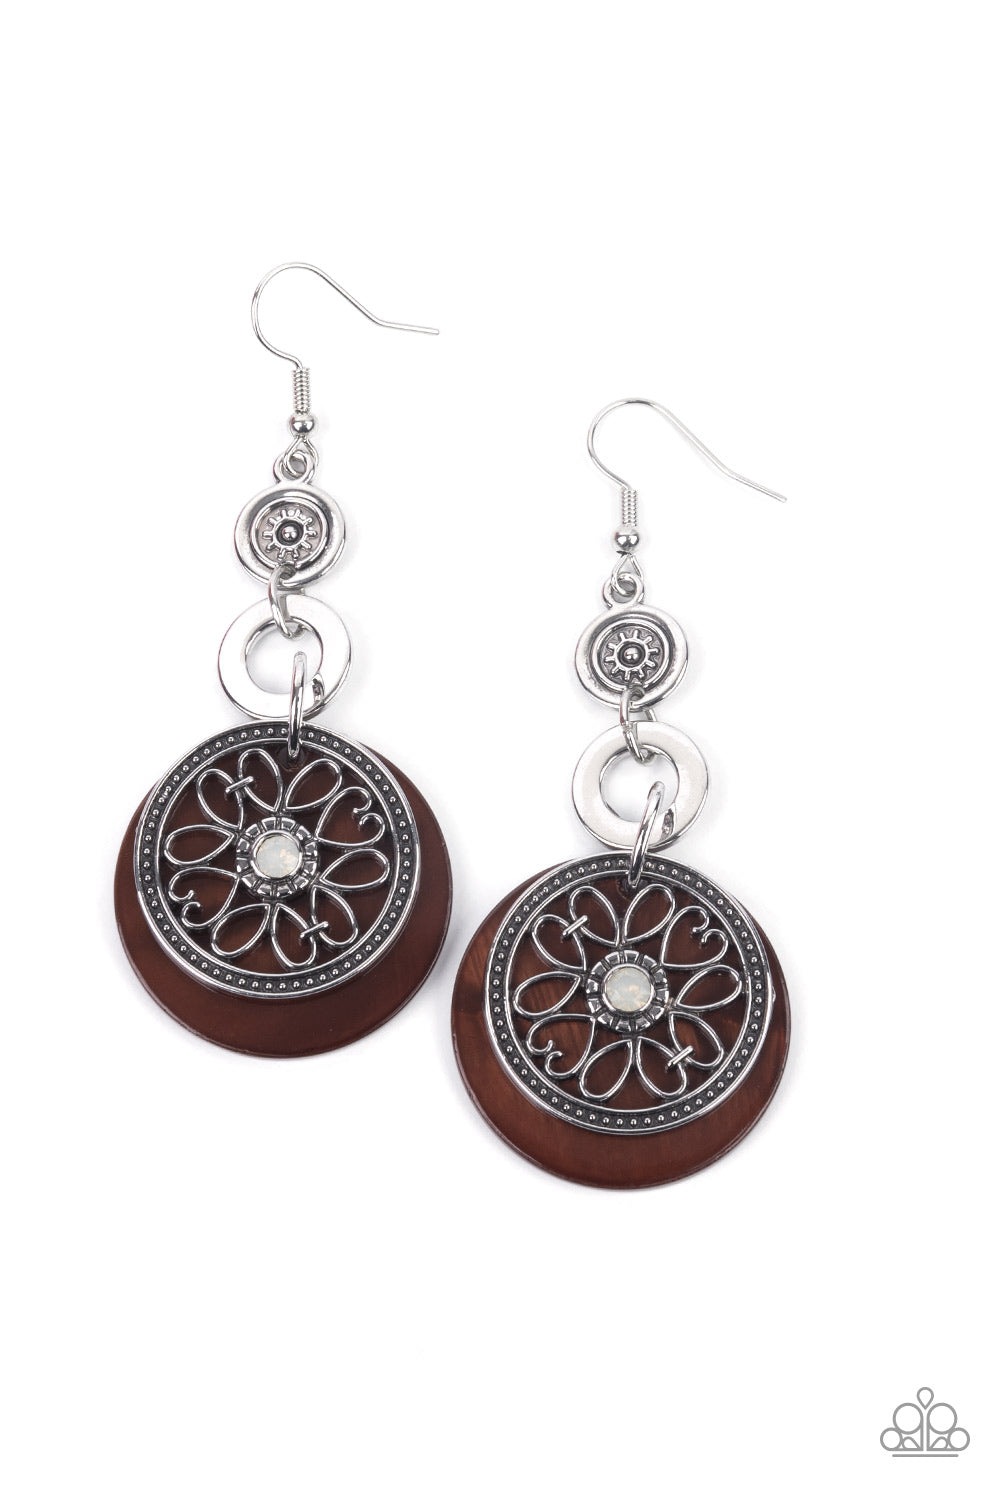 Paparazzi Accessories Royal Marina - Brown Fishhook Earrings reminiscent of an eclipse, an airy silver ring radiating with ornate petals, sways in front of a brown shell-like disc. Silver rings in graduating sizes cascade from the top for a whimsically nautical look. Earring attaches to a standard fishhook fitting.  Sold as one pair of earrings.